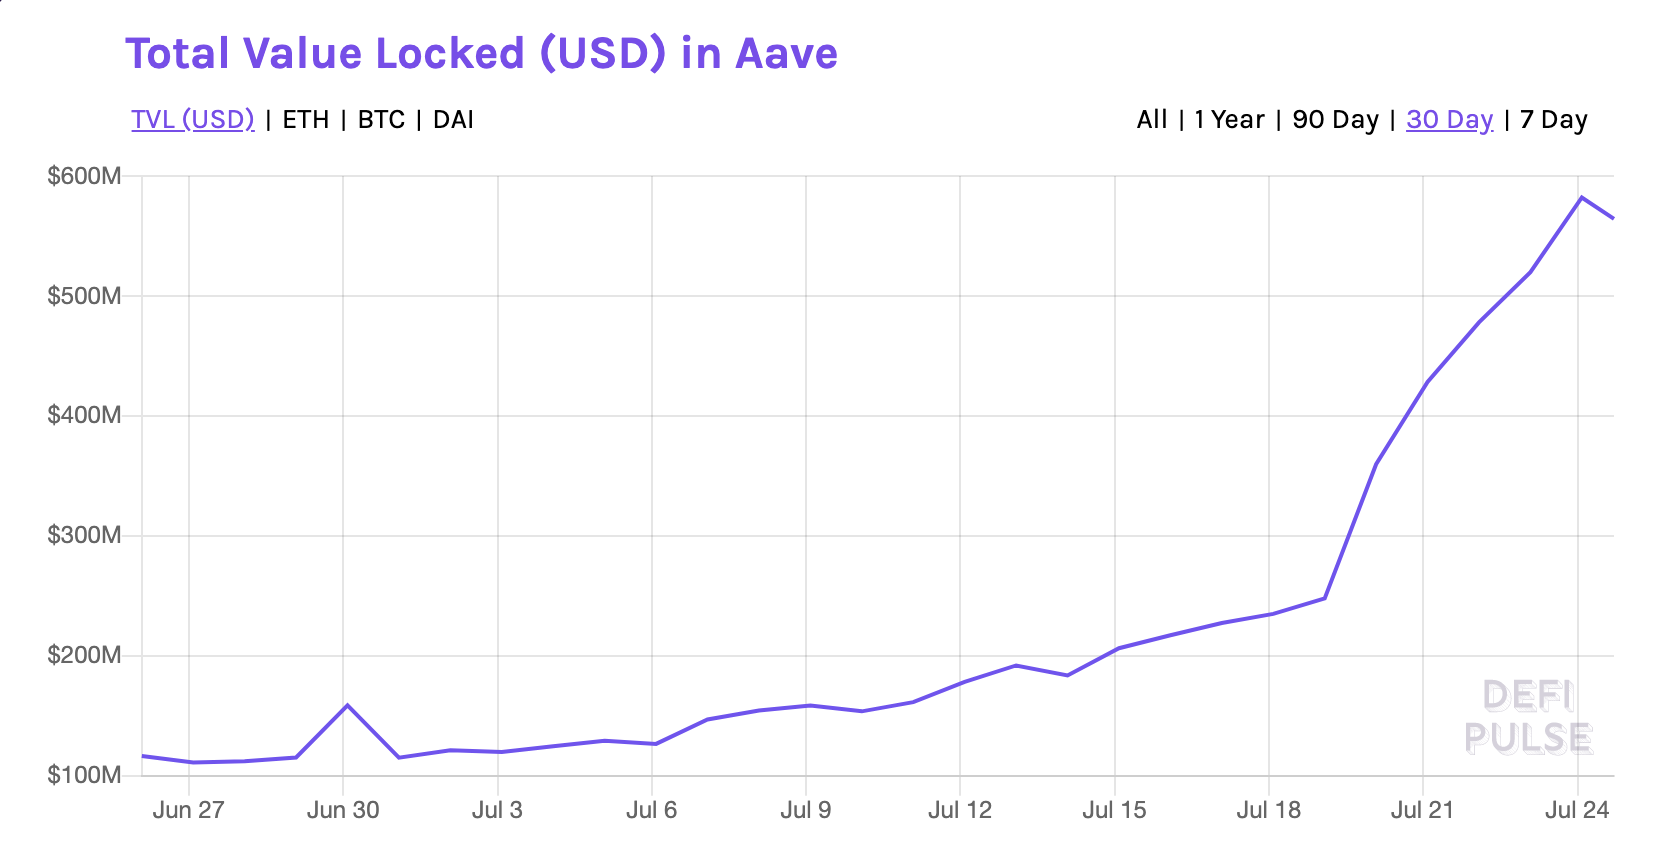 Total Value Locked in Aave by DeFi Pulse